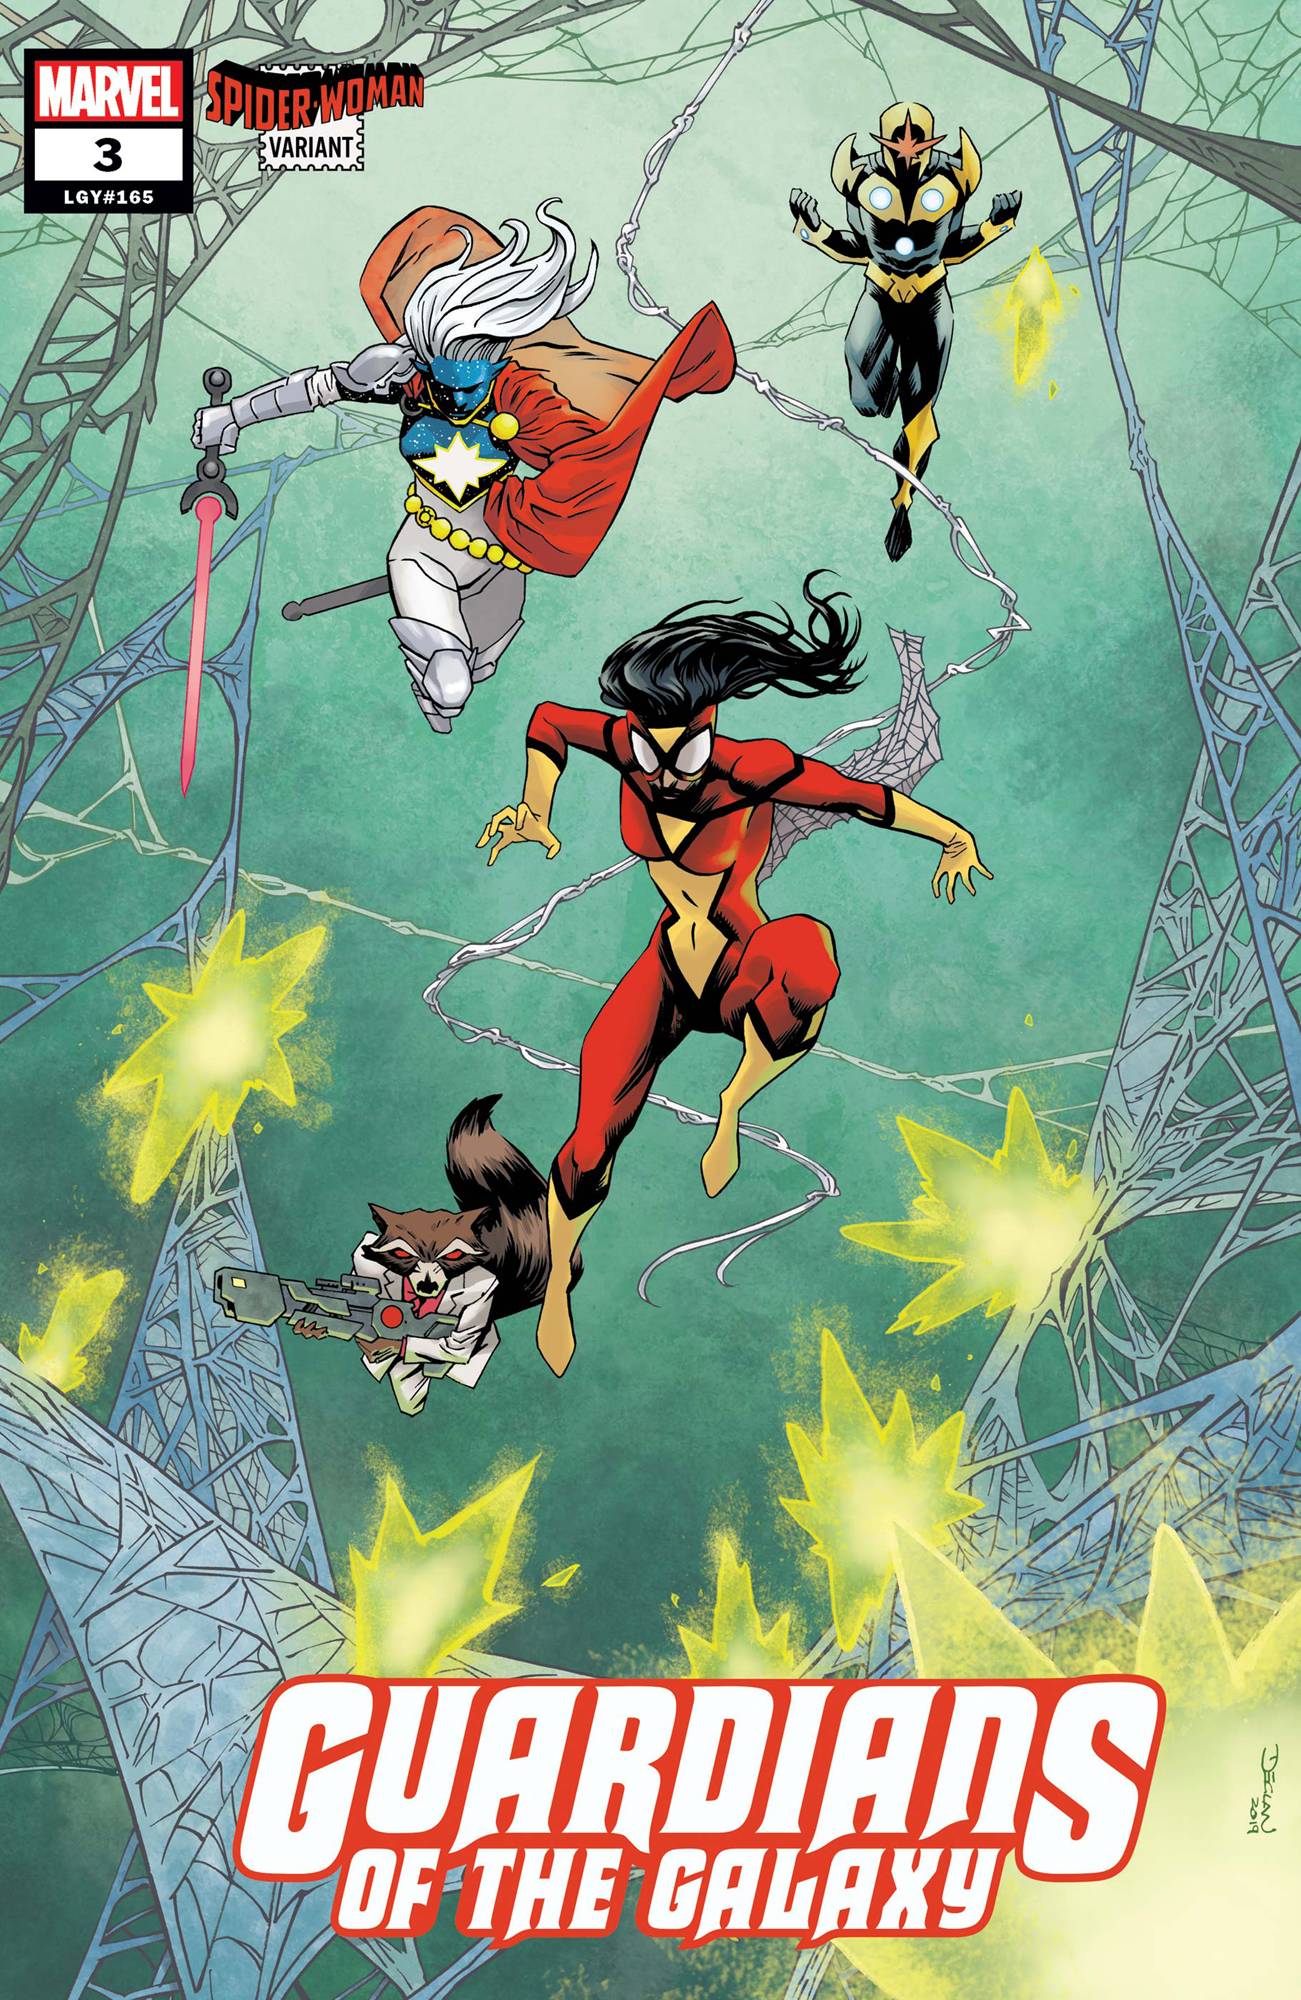 GUARDIANS OF THE GALAXY #3 SHALVEY SPIDER-WOMAN VAR